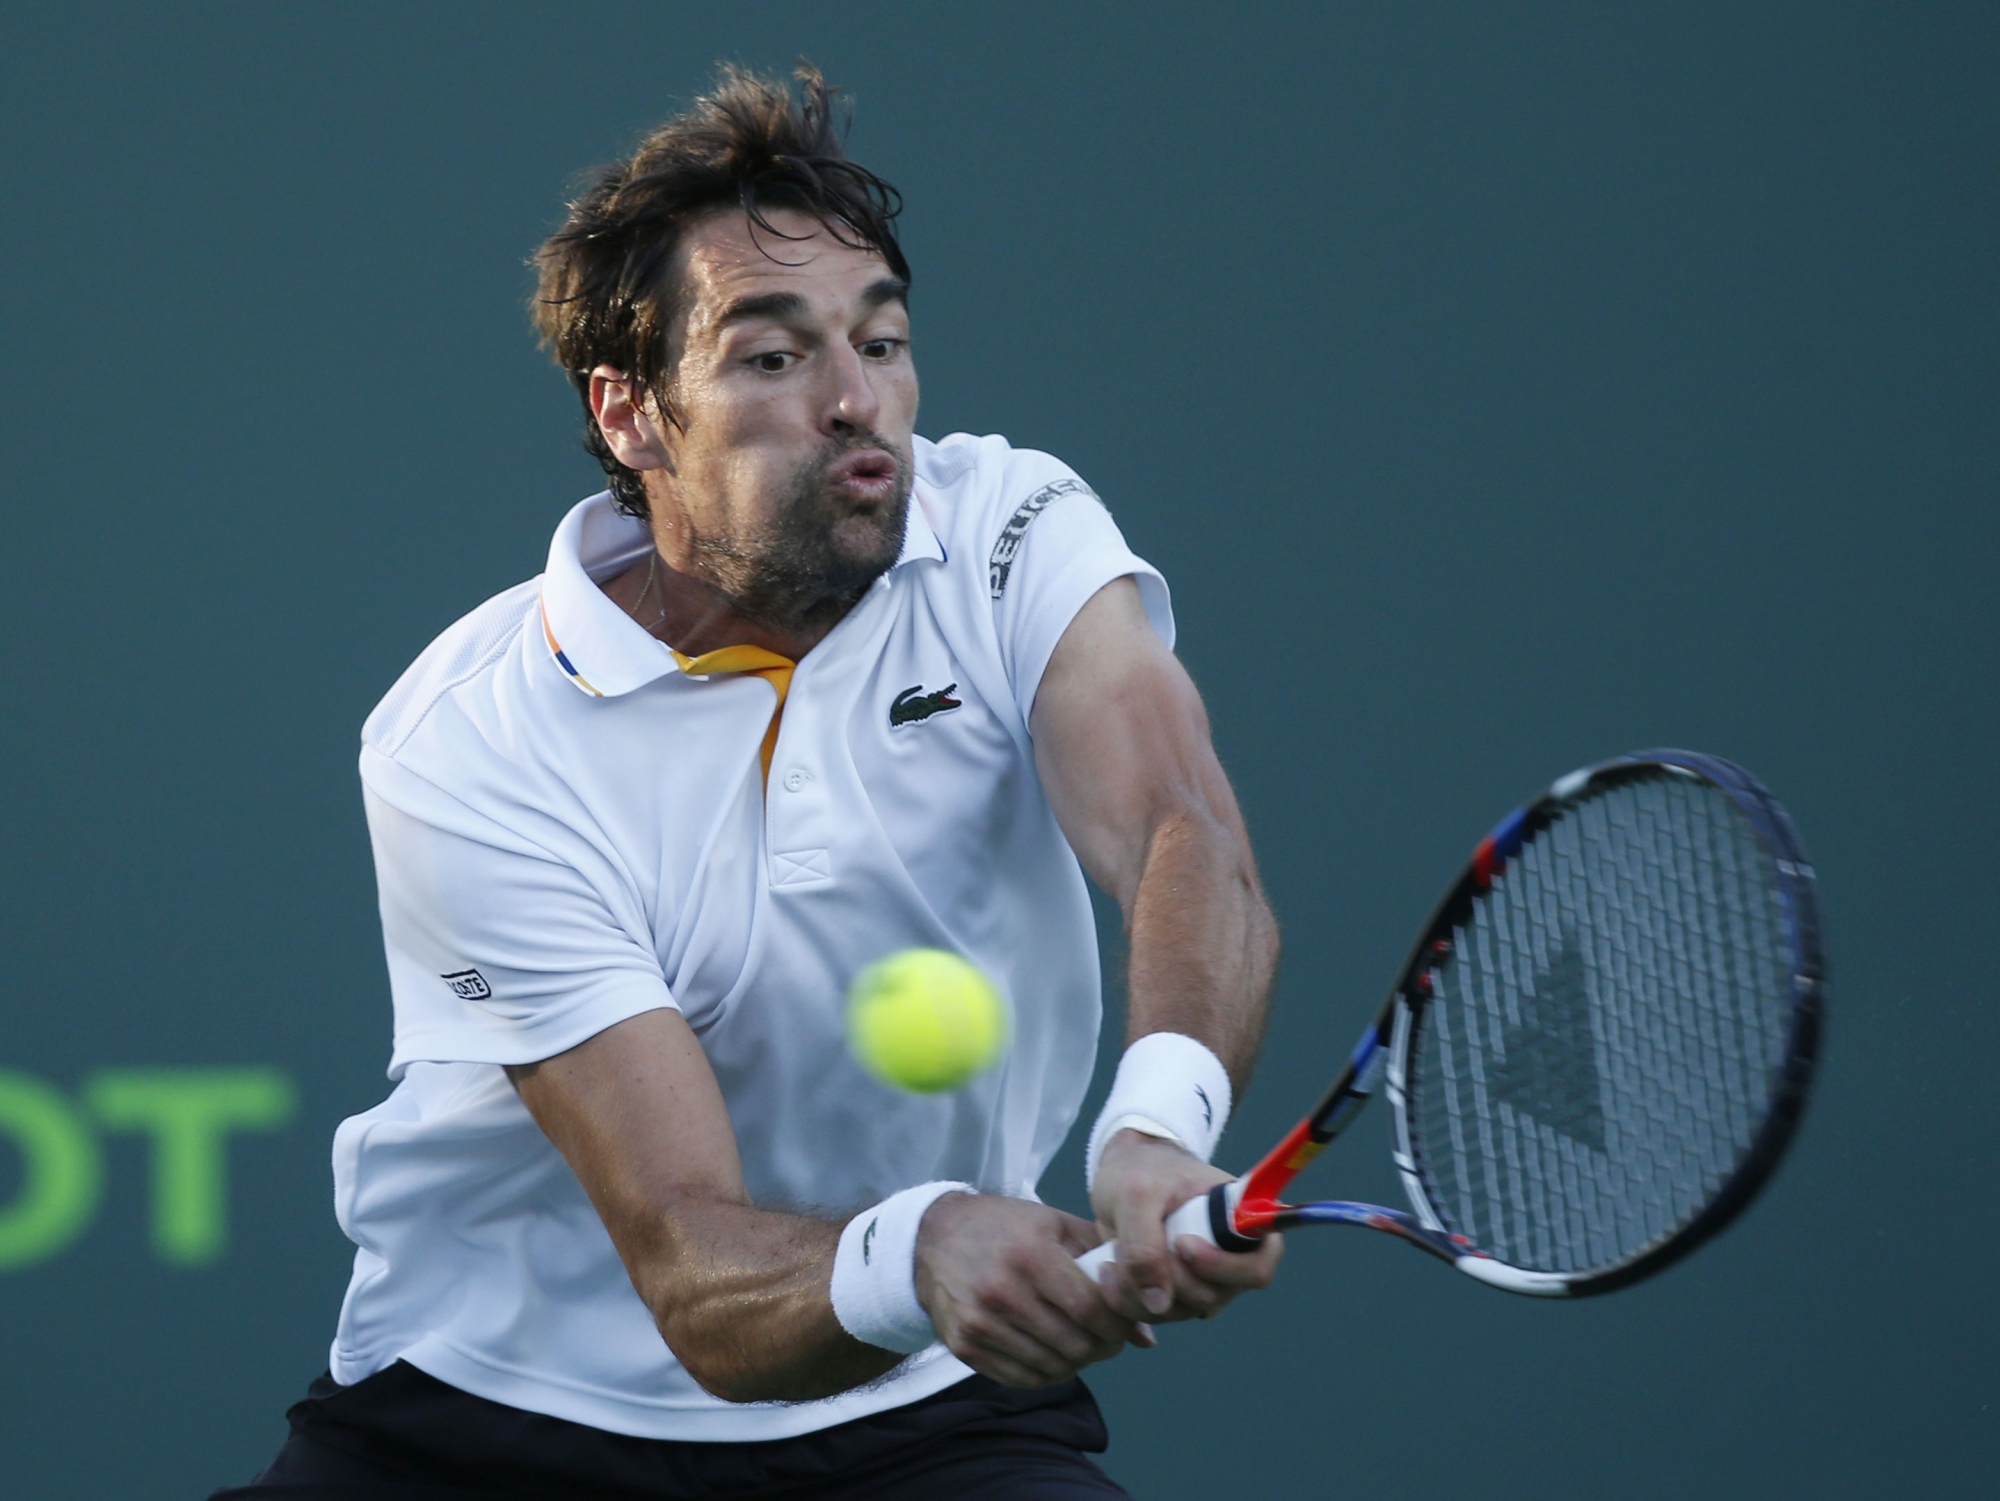 Jeremy Chardy, of France, returns a shot from Grigor Dimitrov, of Bulgaria, during a tennis match at the Miami Open, Sunday, March 25, 2018, in Key Biscayne, Fla. Chardy defeated Dimitrov 6-4, 6-4. (AP Photo/Wilfredo Lee)